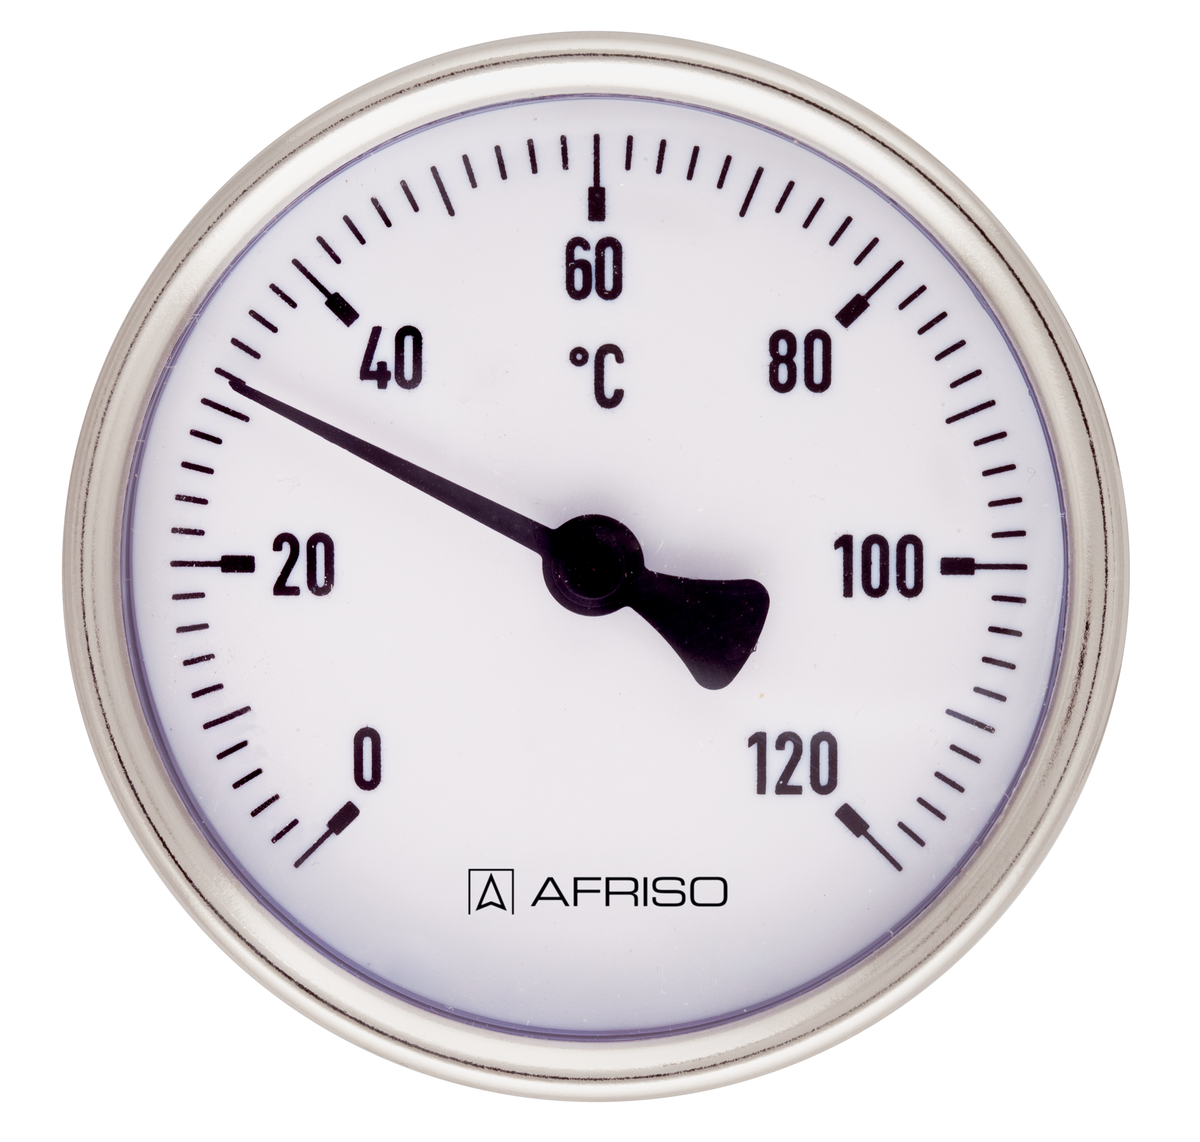 AFRISO Bimetall-Thermometer BiTh 50 ST 0/60C 40mm G1/2B axial Kl.2 VOR 88310 88320 88330 88340 88360 88370 88380 88390 88420 88430 88440 88450 88470 88480 88490 88500 88520 88530 88540 88550 88570 88580 88590 88600 88630 88640 88650 88660 88680 88690 88700 88710 88730 88740 88750 88760 88770 88790 88800 88810 88820 88850 88860 88870 88880 88900 88910 88920 88930 88950 88960 88970 88980 88990 89010 89020 89030 89040